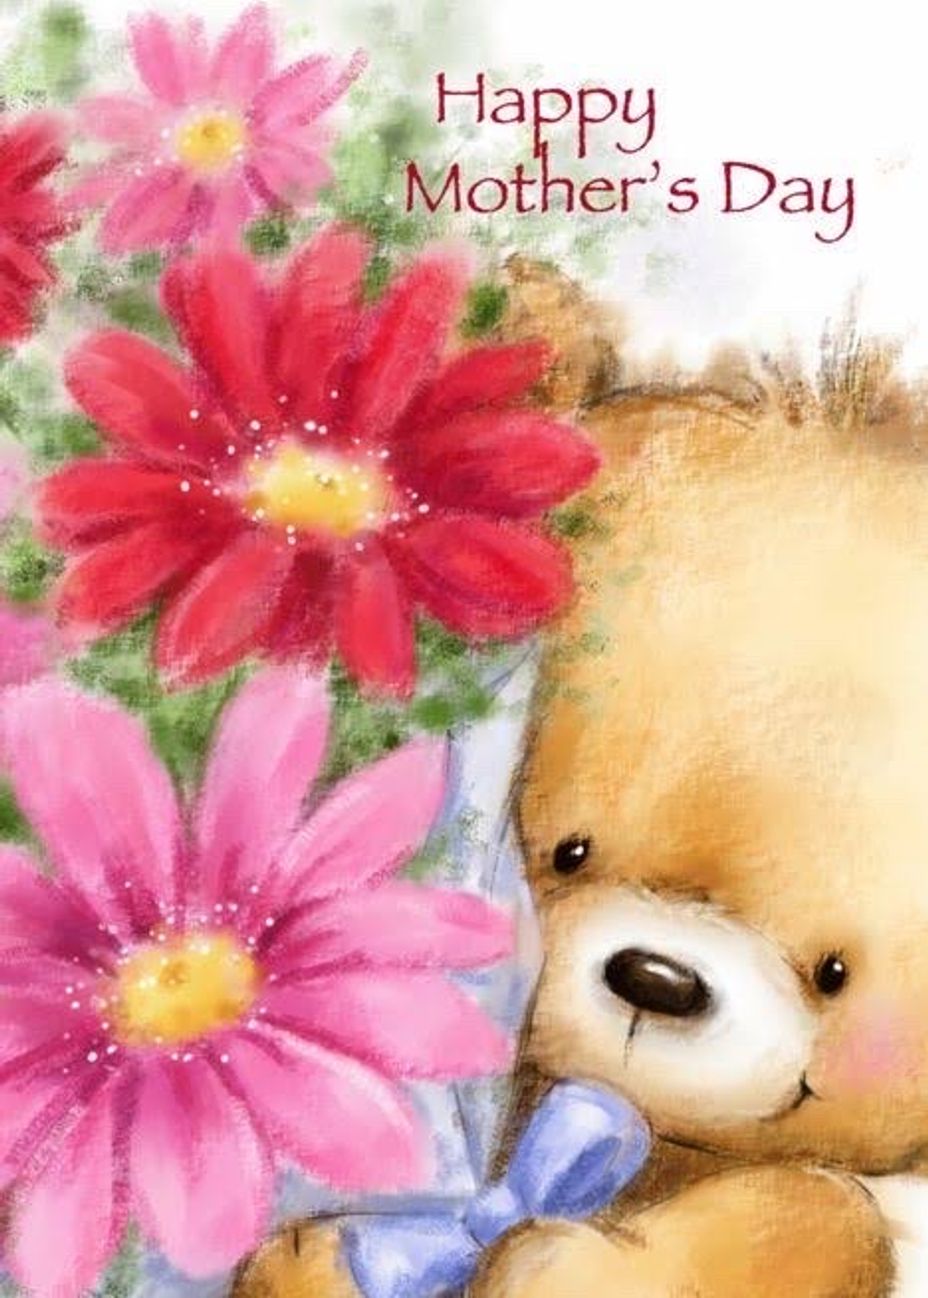 <p>Happy Mother’s Day<br><a class="tm-topic-link ugc-topic" title="mothers" href="/topic/mothers/" data-id="5b23ce9e00553f33fe99818e" data-name="mothers" aria-label="hashtag mothers">#Mothers</a>  <a class="tm-topic-link ugc-topic" title="motherhood" href="/topic/motherhood/" data-id="5b23ce9e00553f33fe998163" data-name="motherhood" aria-label="hashtag motherhood">#Motherhood</a>  <a class="tm-topic-link ugc-topic" title="Love" href="/topic/love/" data-id="5b23ce9600553f33fe996c91" data-name="Love" aria-label="hashtag Love">#Love</a> </p>